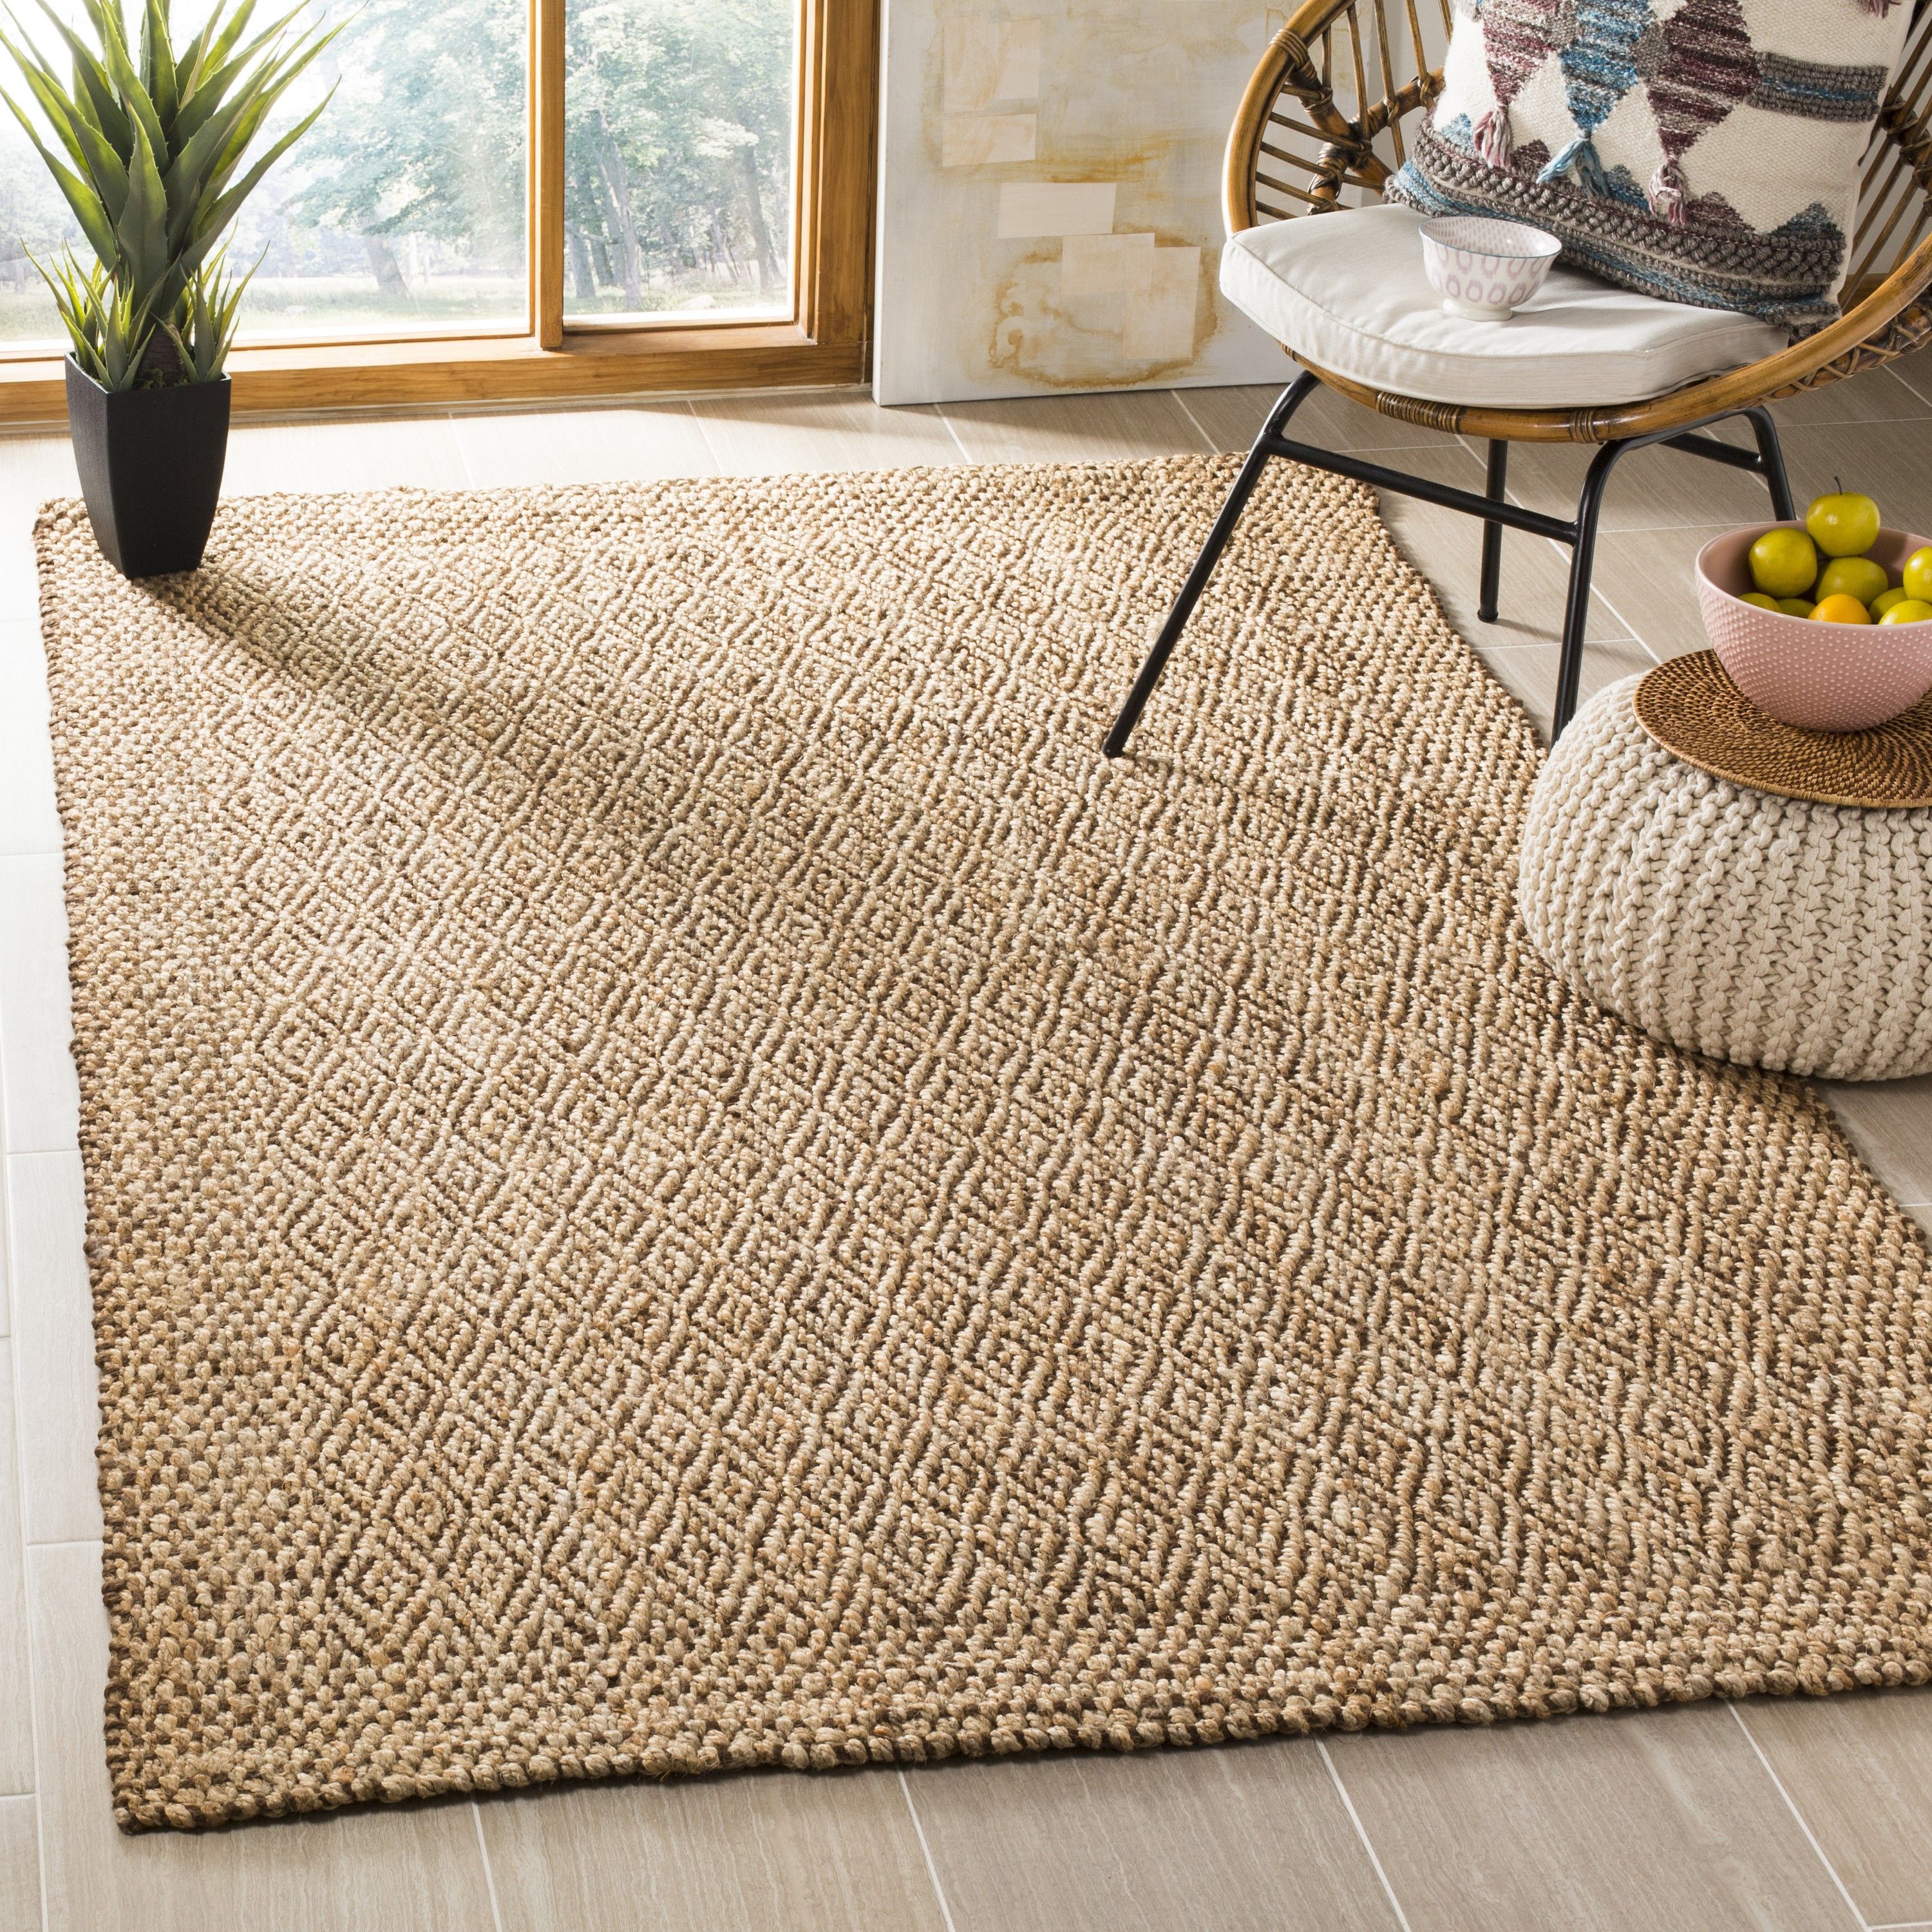 Safavieh Natural Fiber Alava 7 X 7 Jute Natural/brown Square Indoor  Geometric Coastal Area Rug In The Rugs Department At Lowes Intended For Coastal Square Rugs (Photo 1 of 15)